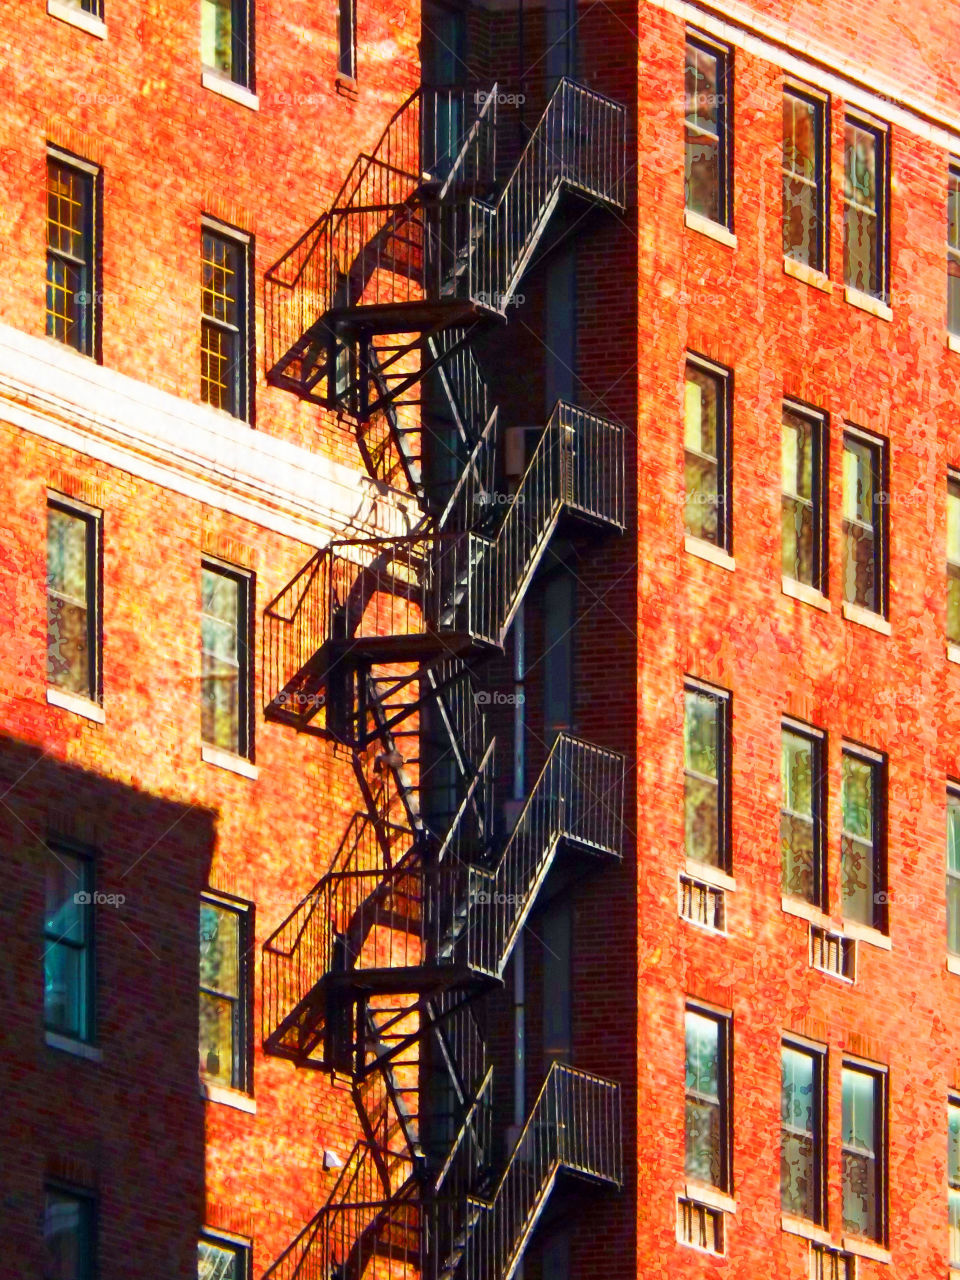 Tall Building with Fire Escape. Two buildings stand side by side with a fire escape going up one side of the building on the right. For a moment it almost looks like an optical illusion.